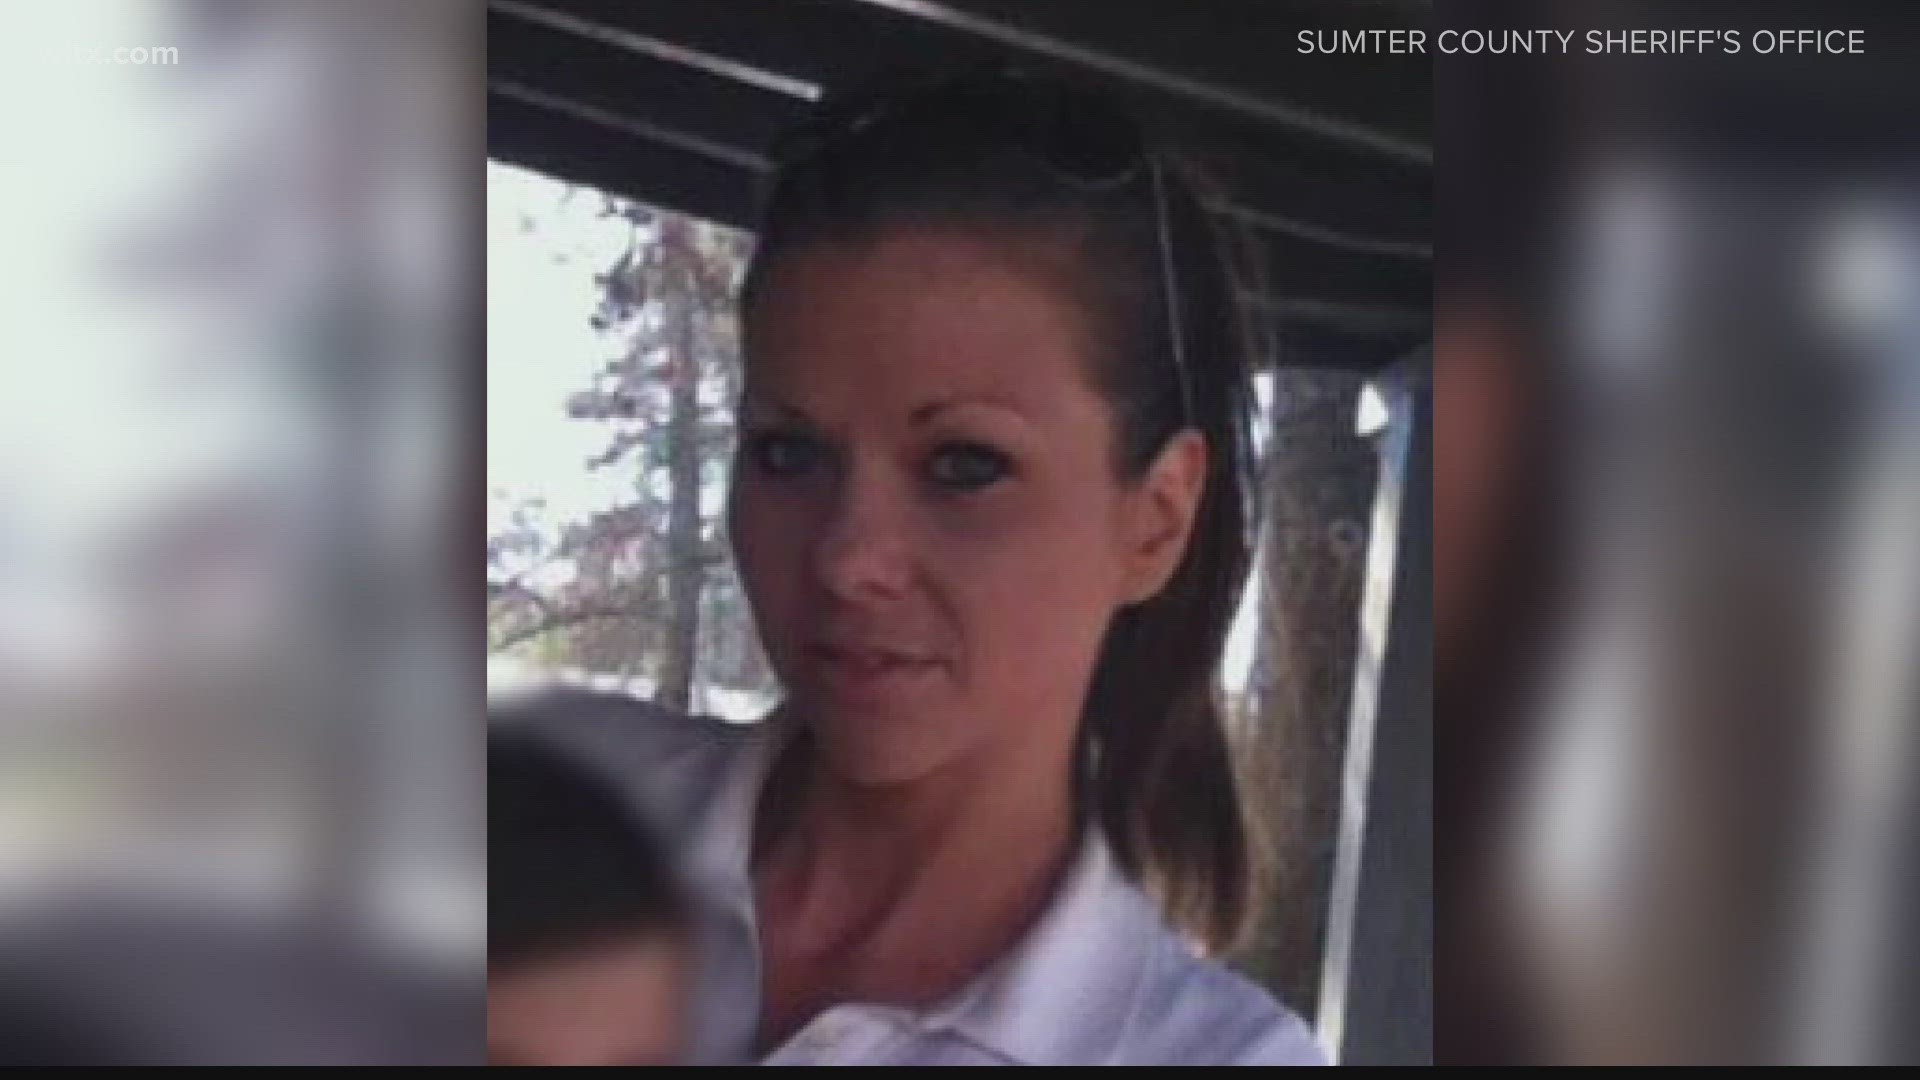 Julie Bean was last seen in Sumter County on May 31 2017 investigators say a third party said there could be a connection between Bean and a suspected serial killer